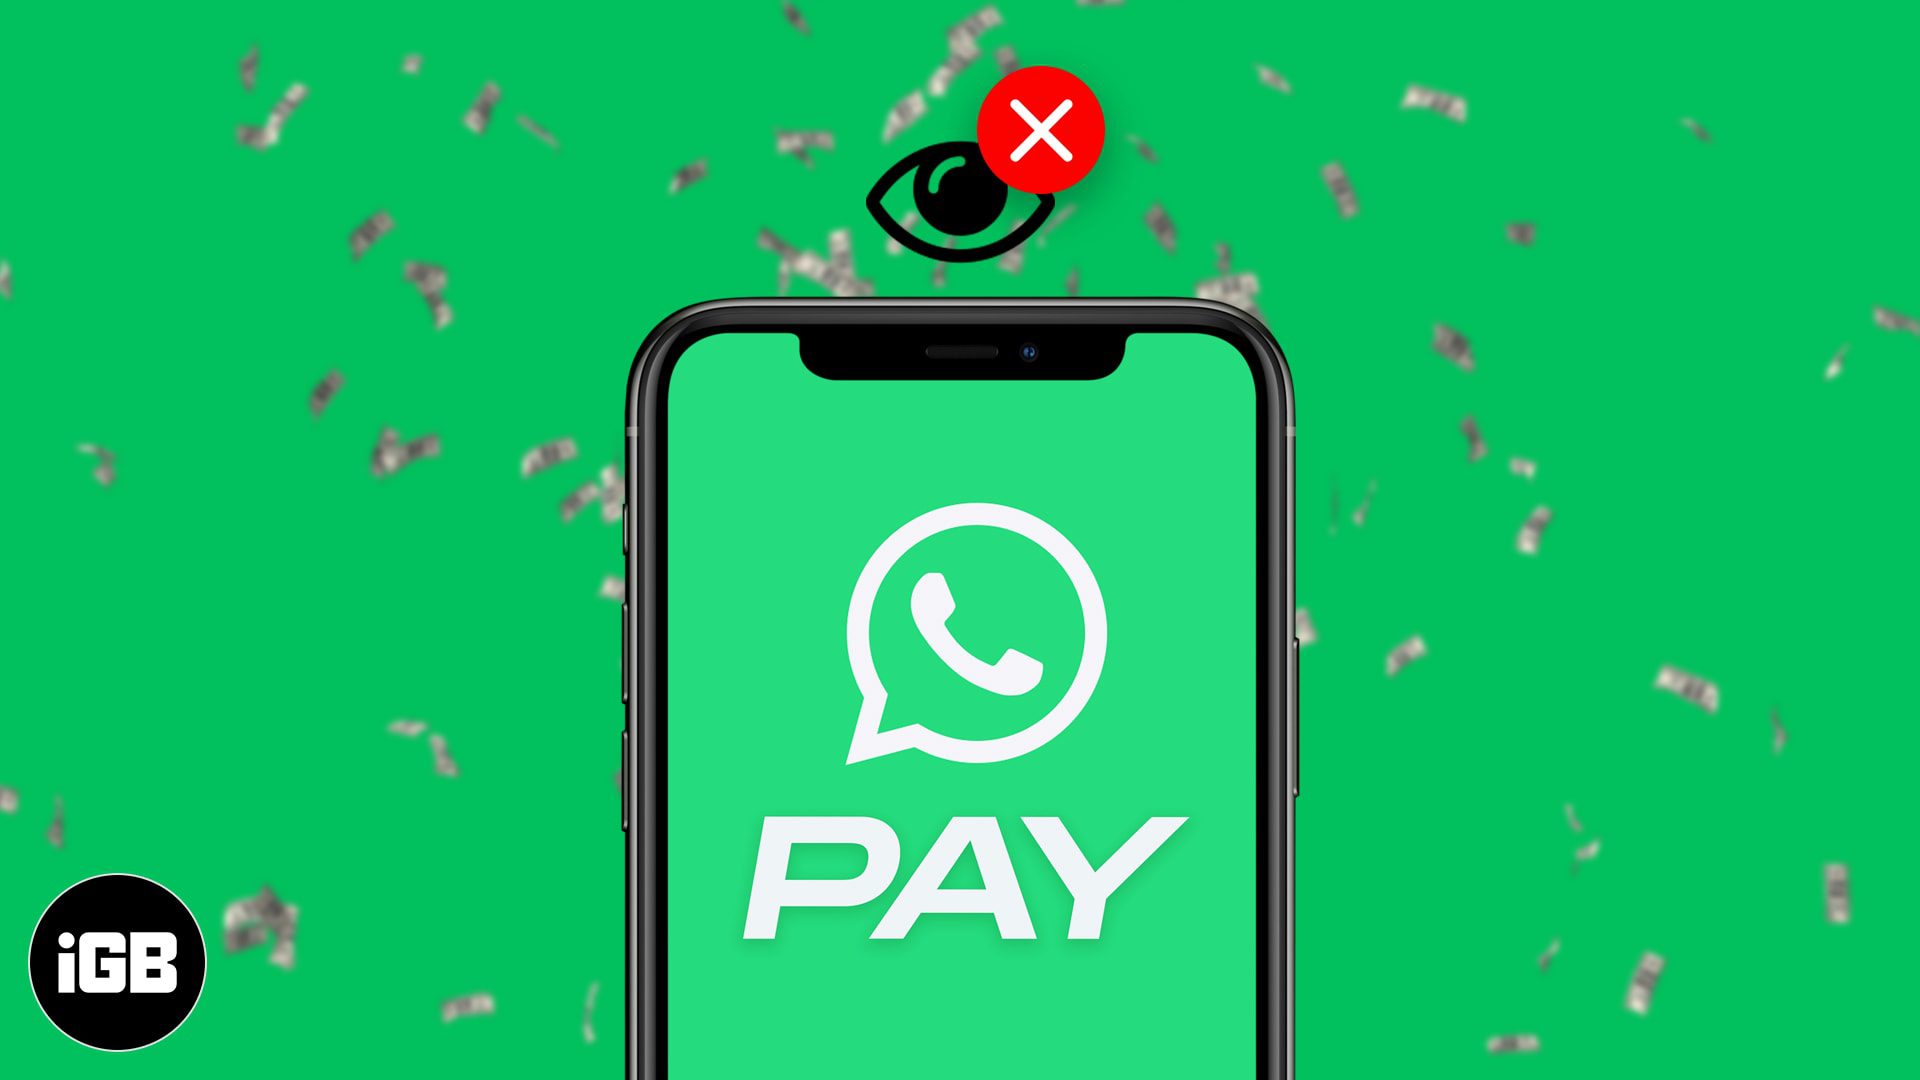 WhatsApp Payment Option Not Showing